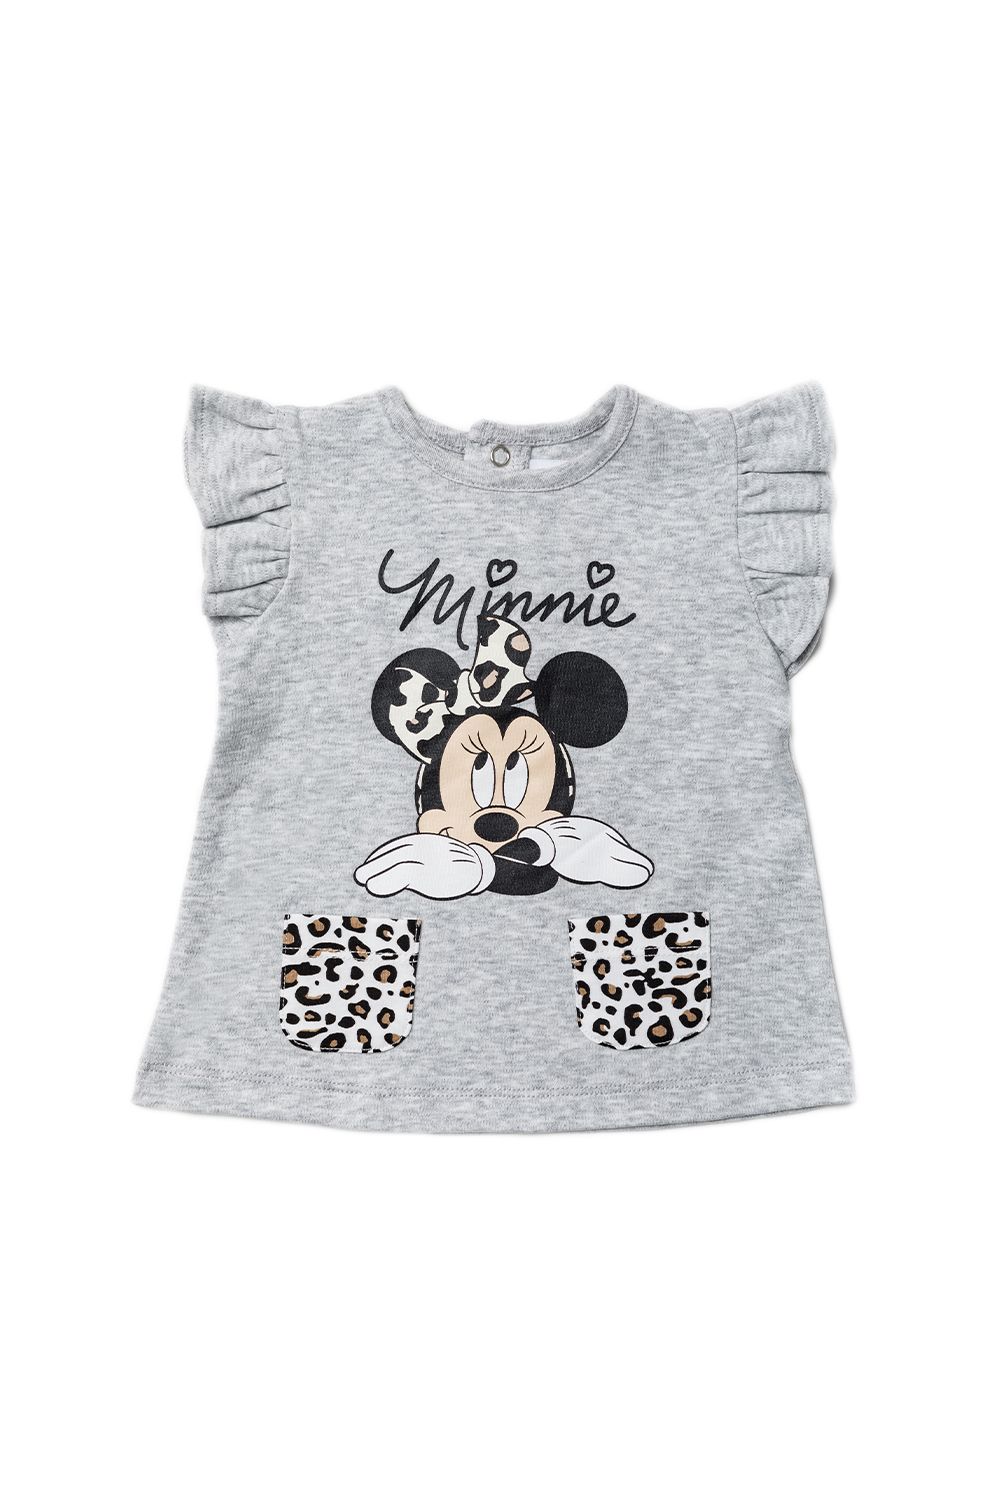 This adorable Disney Baby three-piece set features Minnie Mouse print with leopard print details. The set includes a t-shirt with frilled sleeves & pockets, printed leggings, and a matching headband! Each item in the set is cotton and the top has popper fastenings, keeping your little one comfortable. This set would make a lovely gift, or a new addition to your little ones wardrobe!